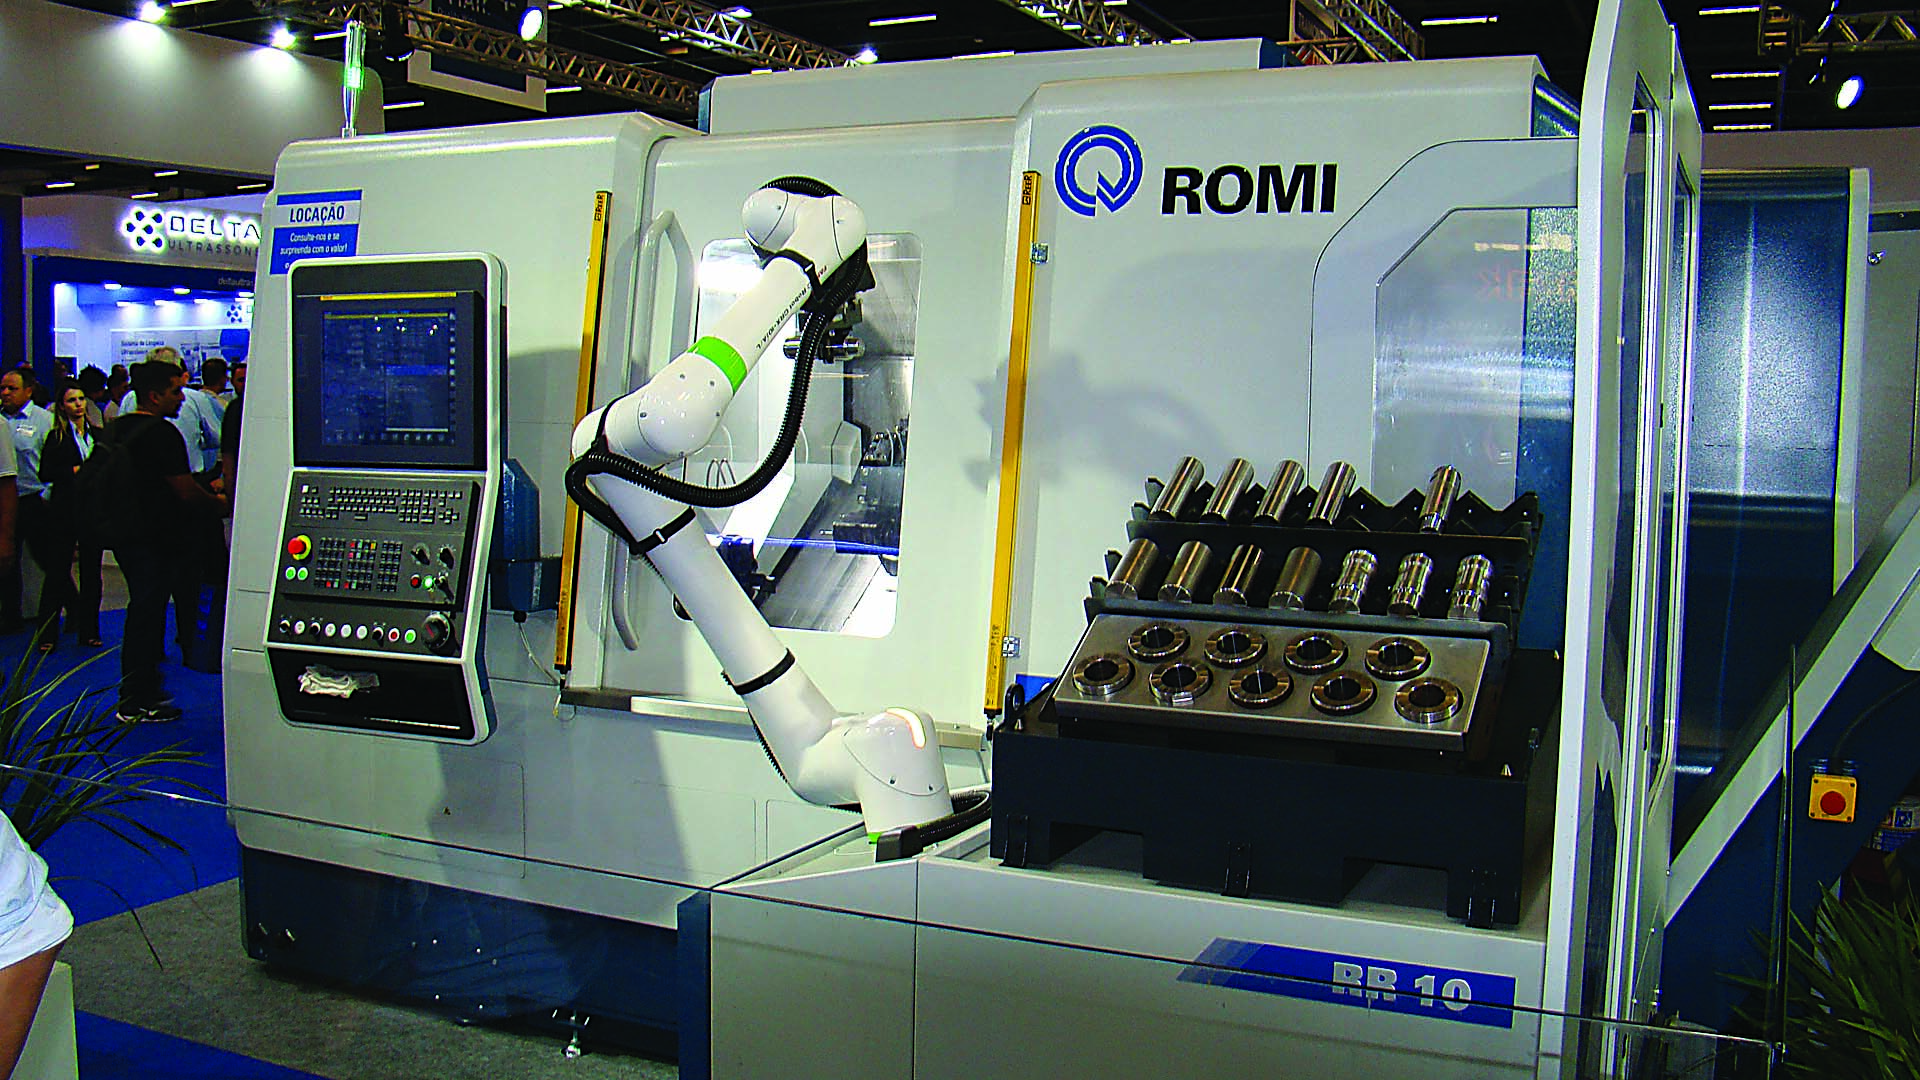  A Romi machine outfitted with a collaborative robot for automated loading and unloading. image courtesy of A. Richter 